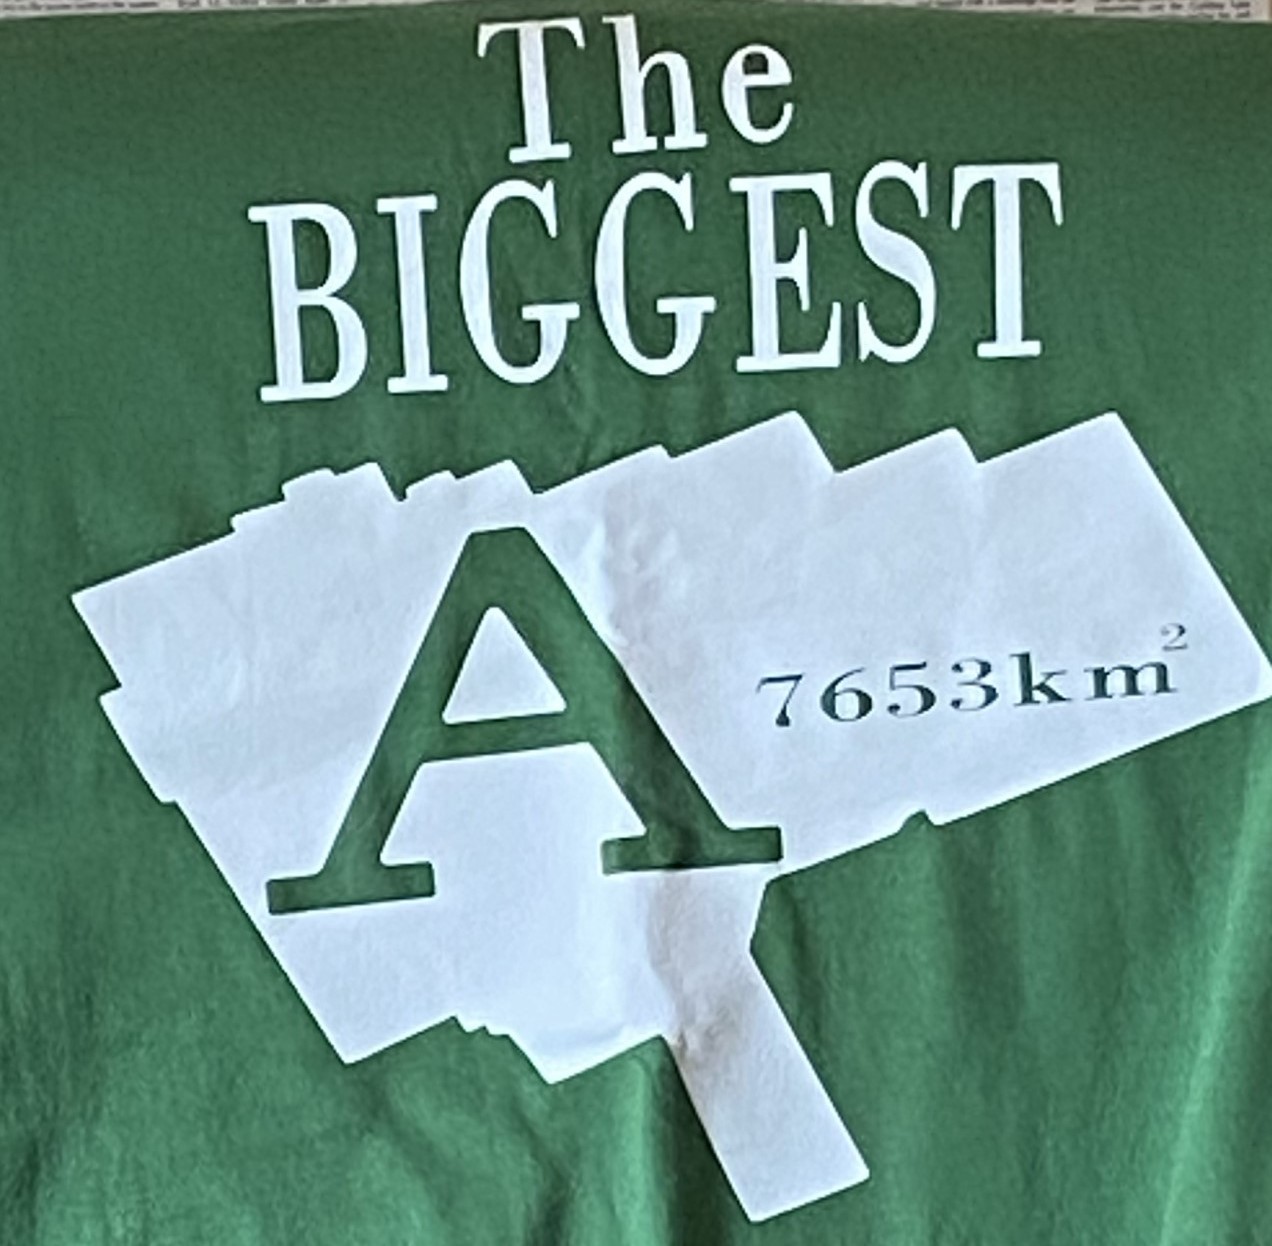 A green t-shirt with "The biggest A" and a map of Algonquin Park printed in white on it.